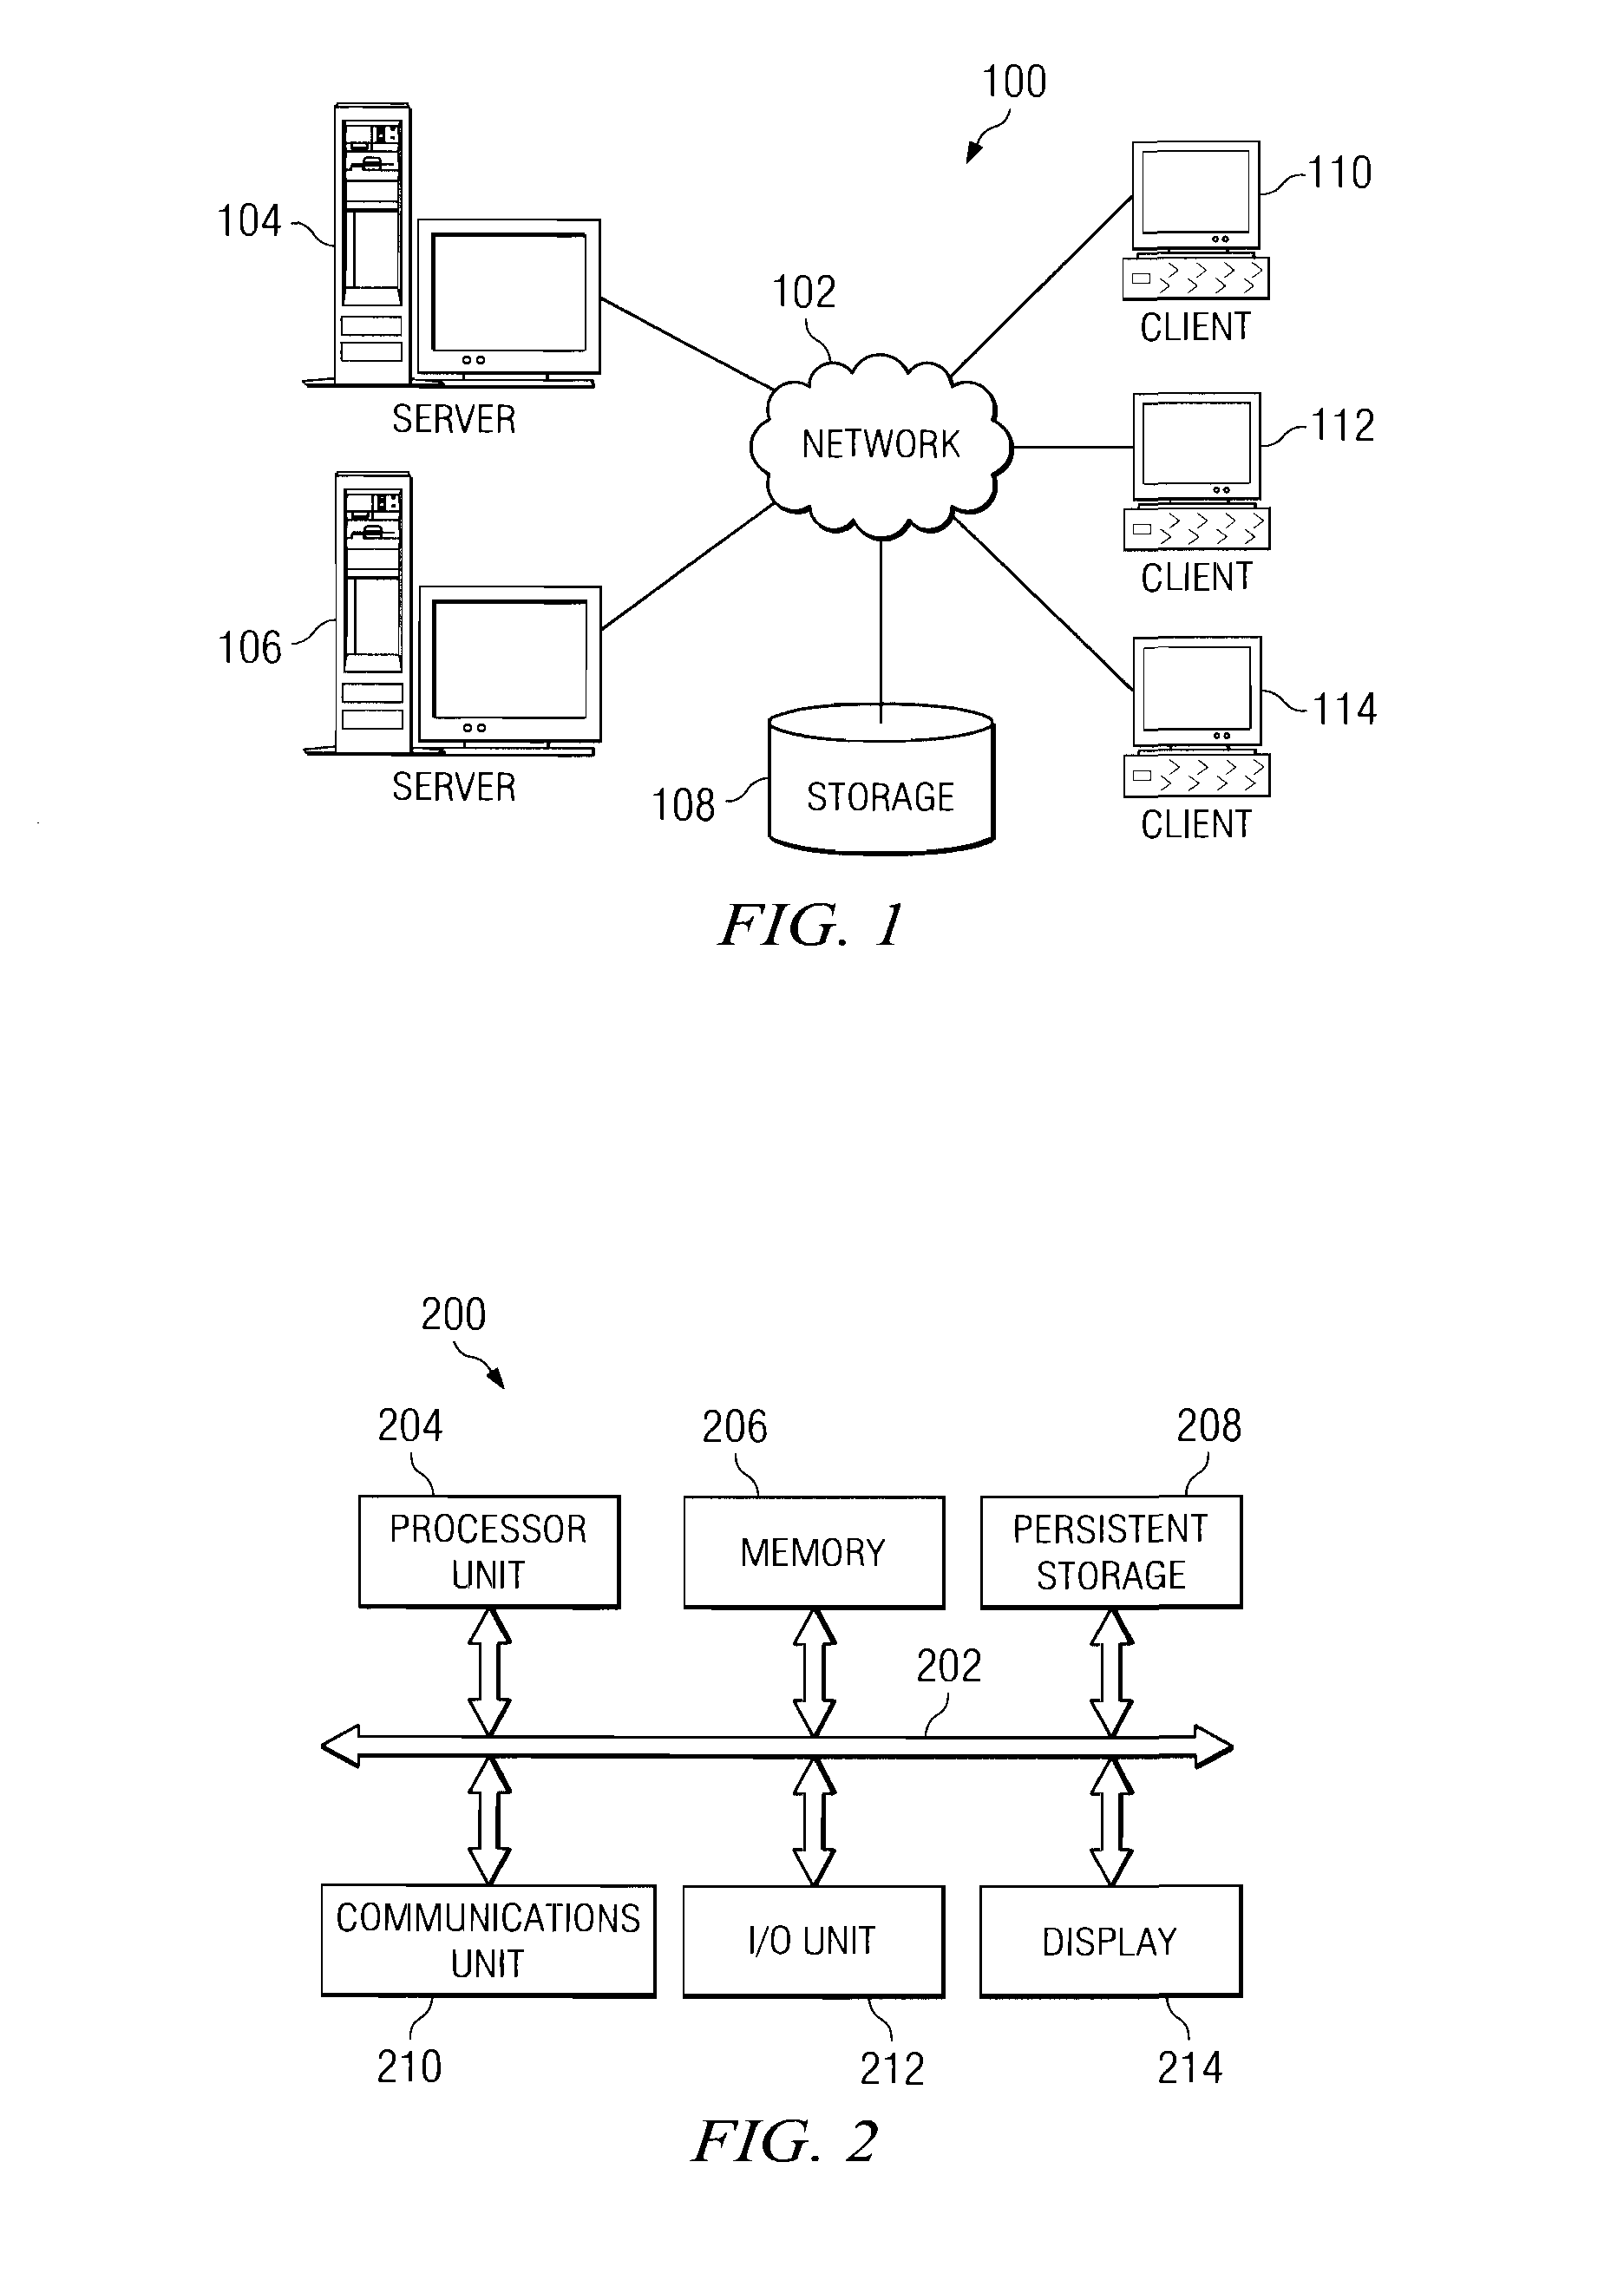 Uniform external and internal interfaces for delinquent memory operations to facilitate cache optimization